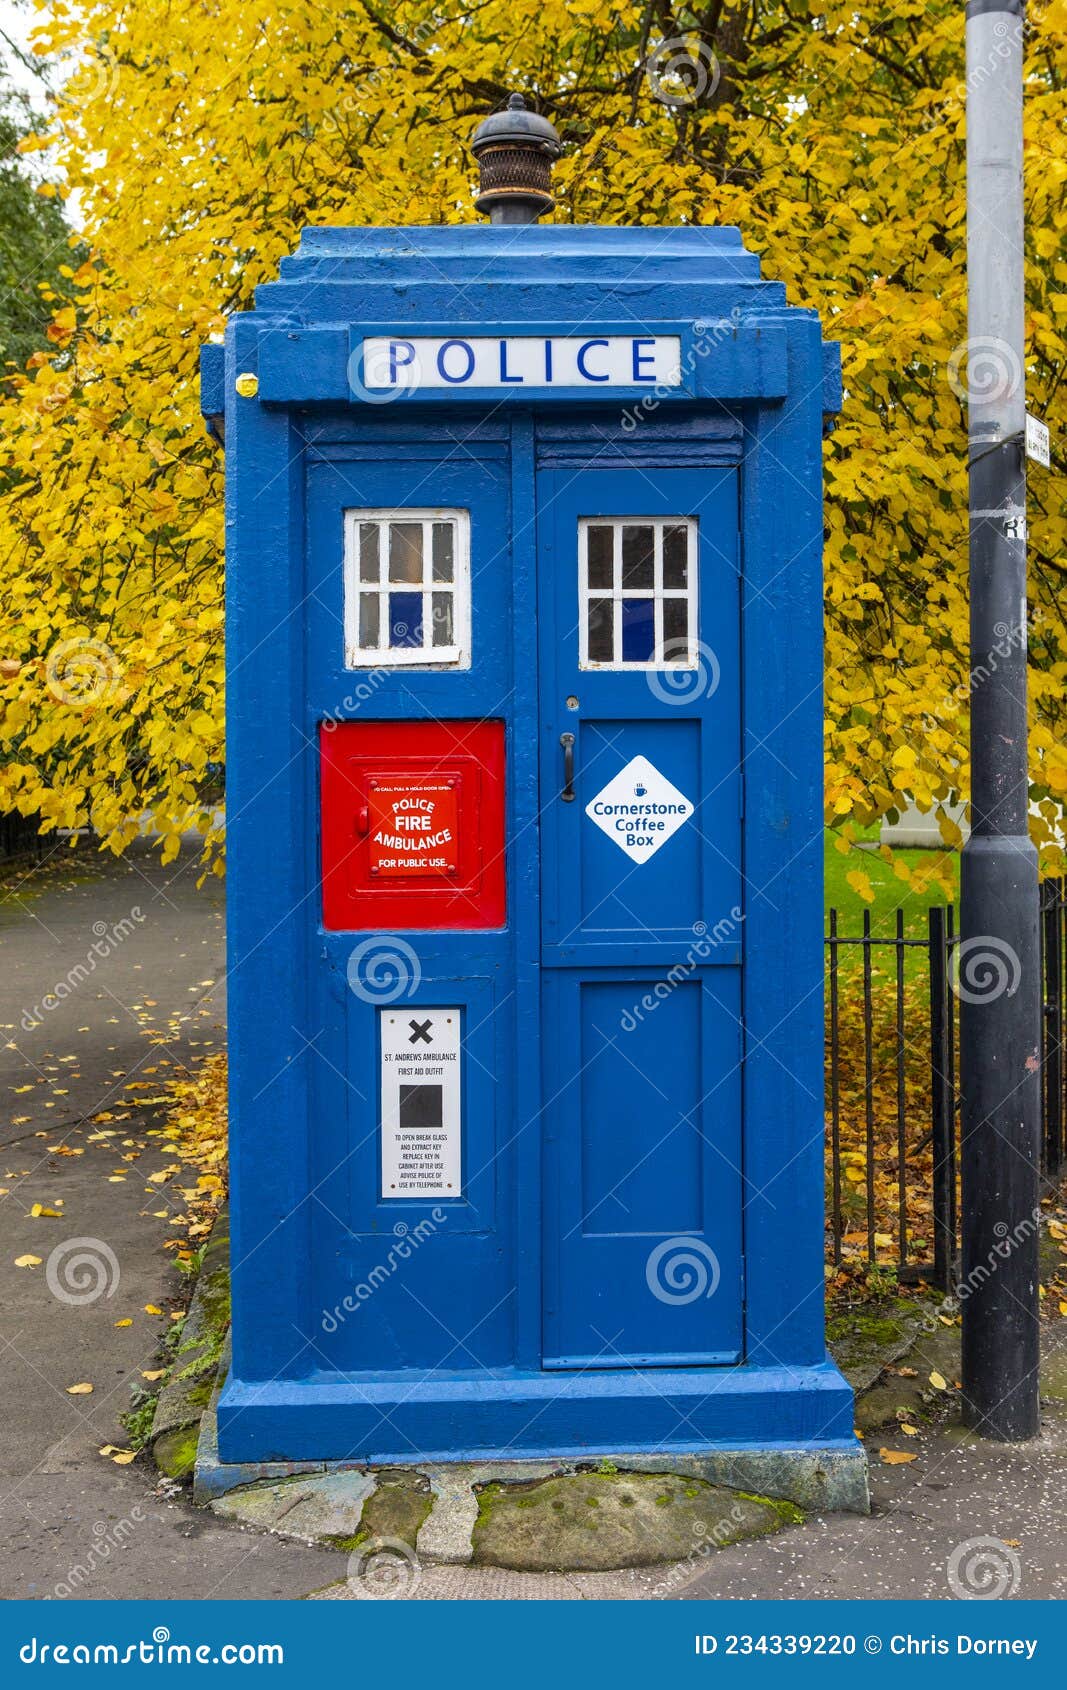 Vintage Police Box in Glasgow, Scotland Editorial Image - Image of ...